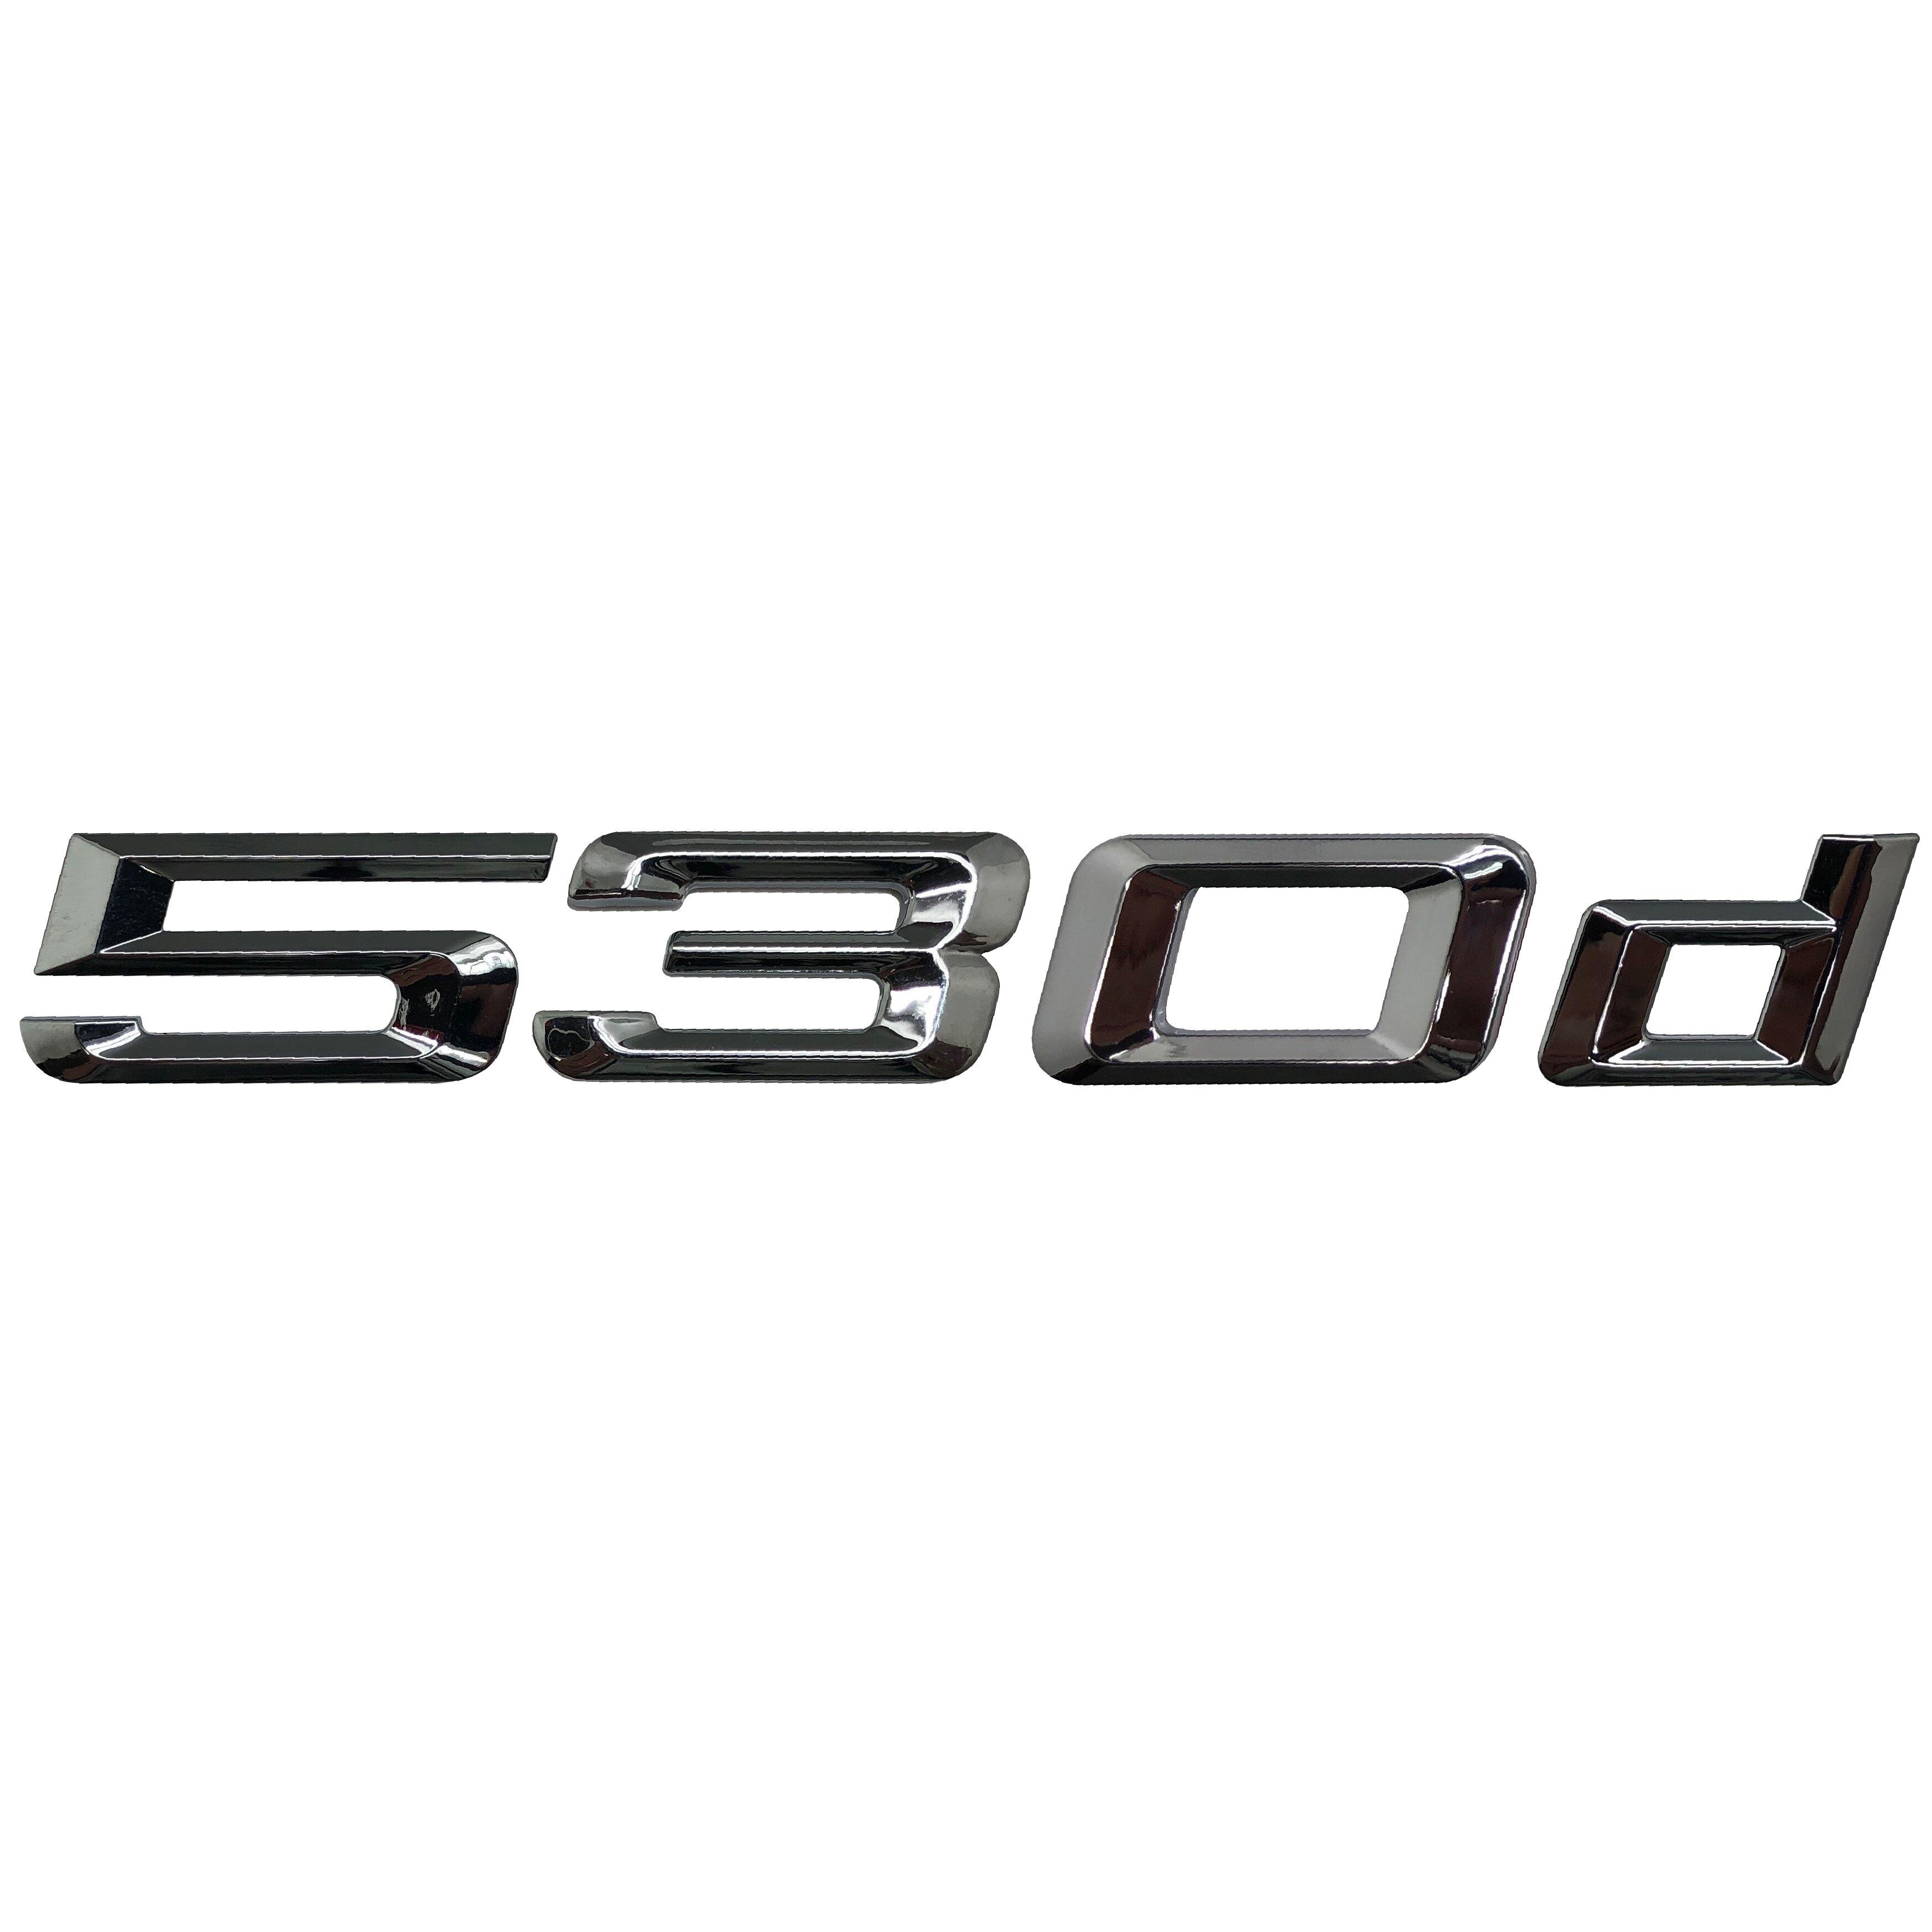 Silver Chrome BMW 530d Rear Boot Badge Emblem Number Letter For 5 Series F07 F18 G30 G31 G38